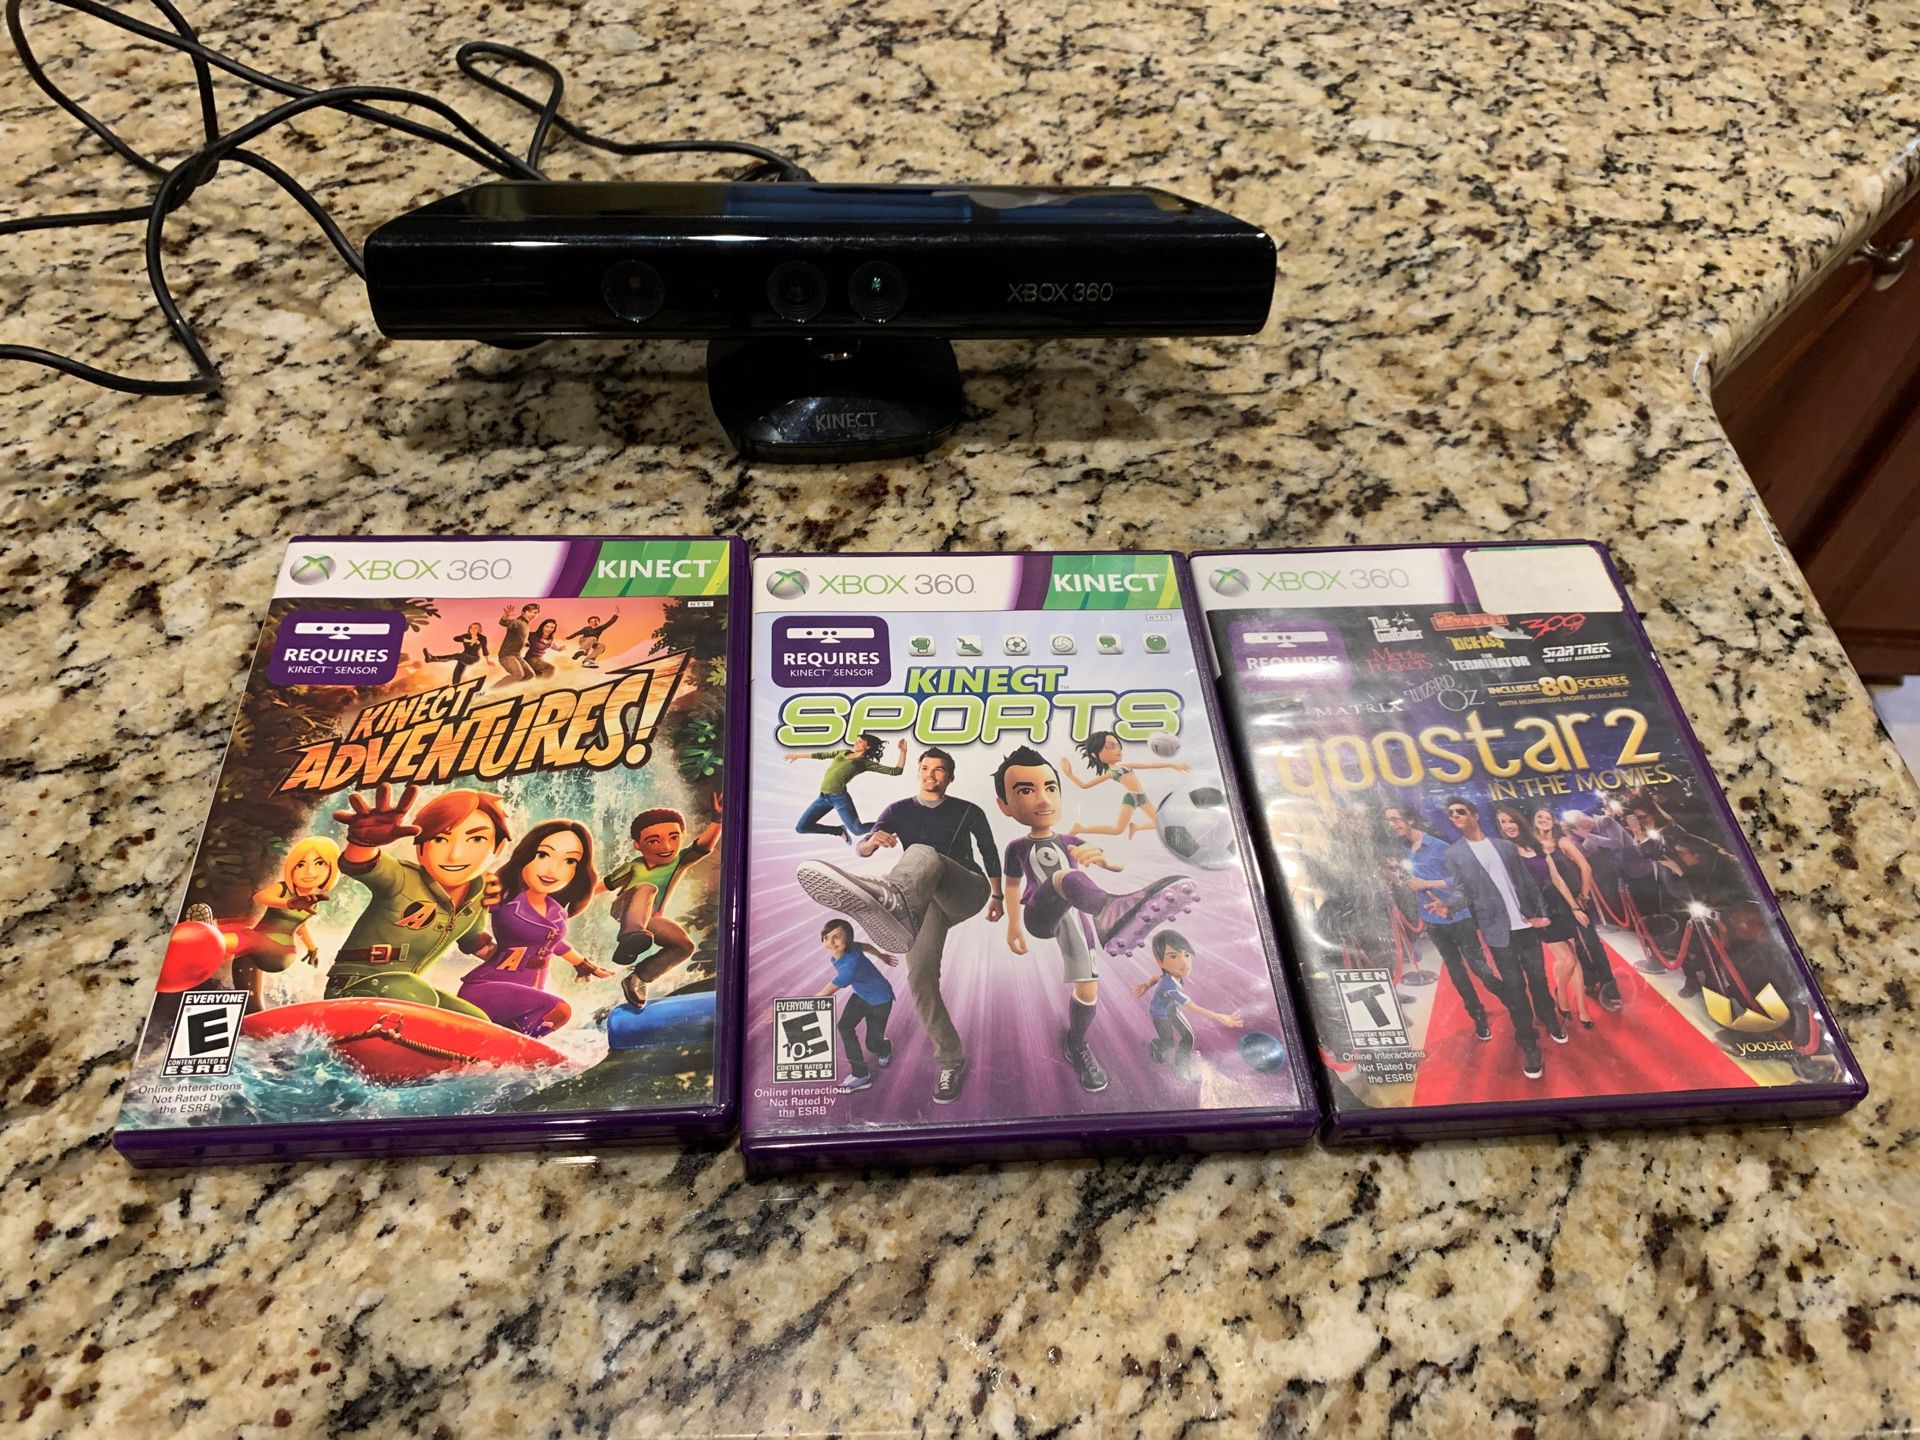 Xbox 360 Kinect with games